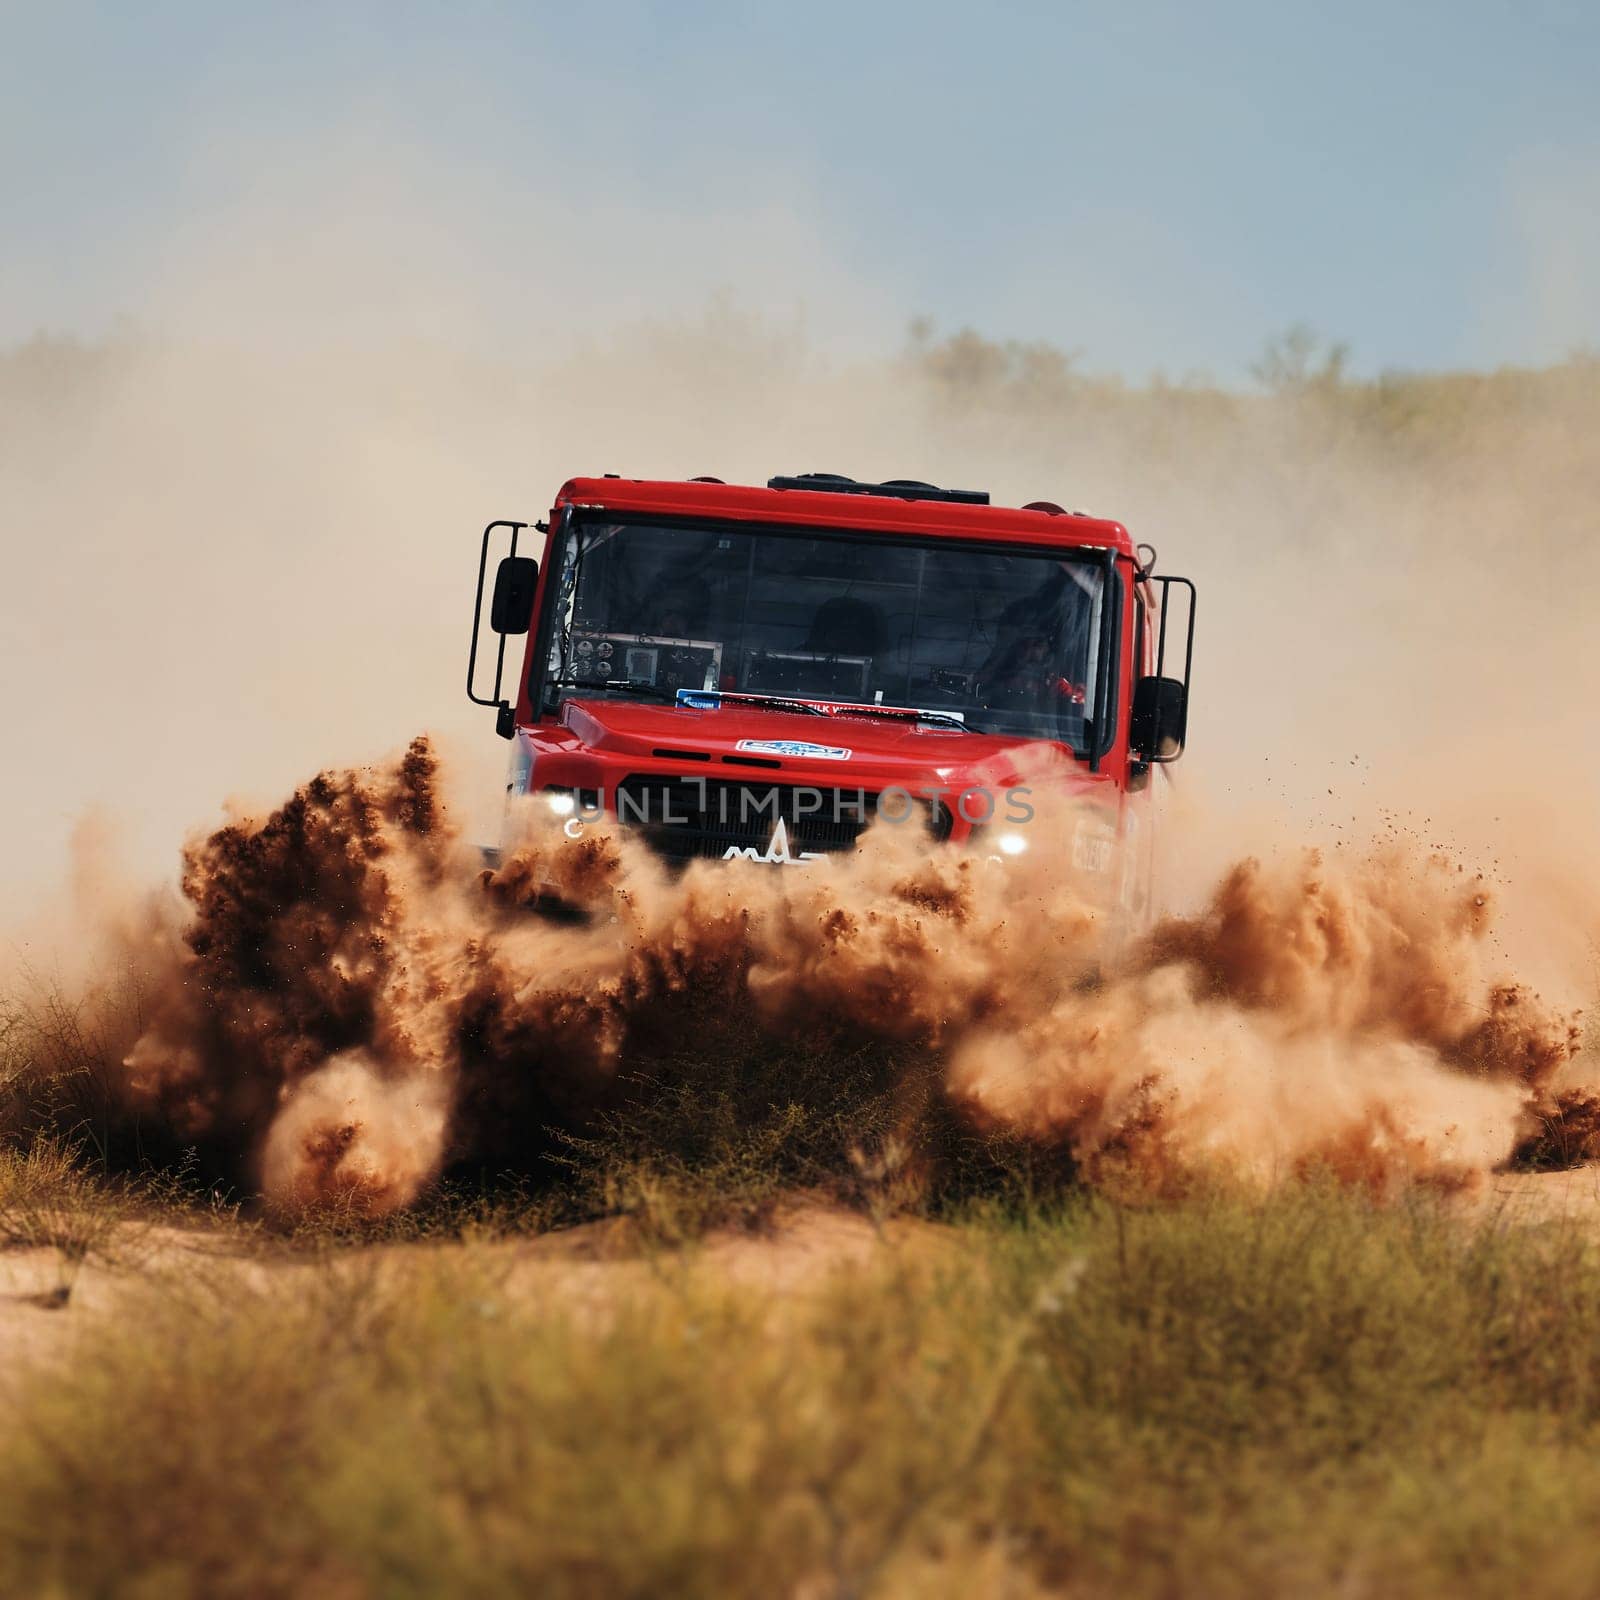 Extreme off-road racing. Sports truck MAZ Sport-auto team gets over the difficult part of the route during the Rally raid in sand. 14.07.2022 Kalmykia, Russia by EvgeniyQW